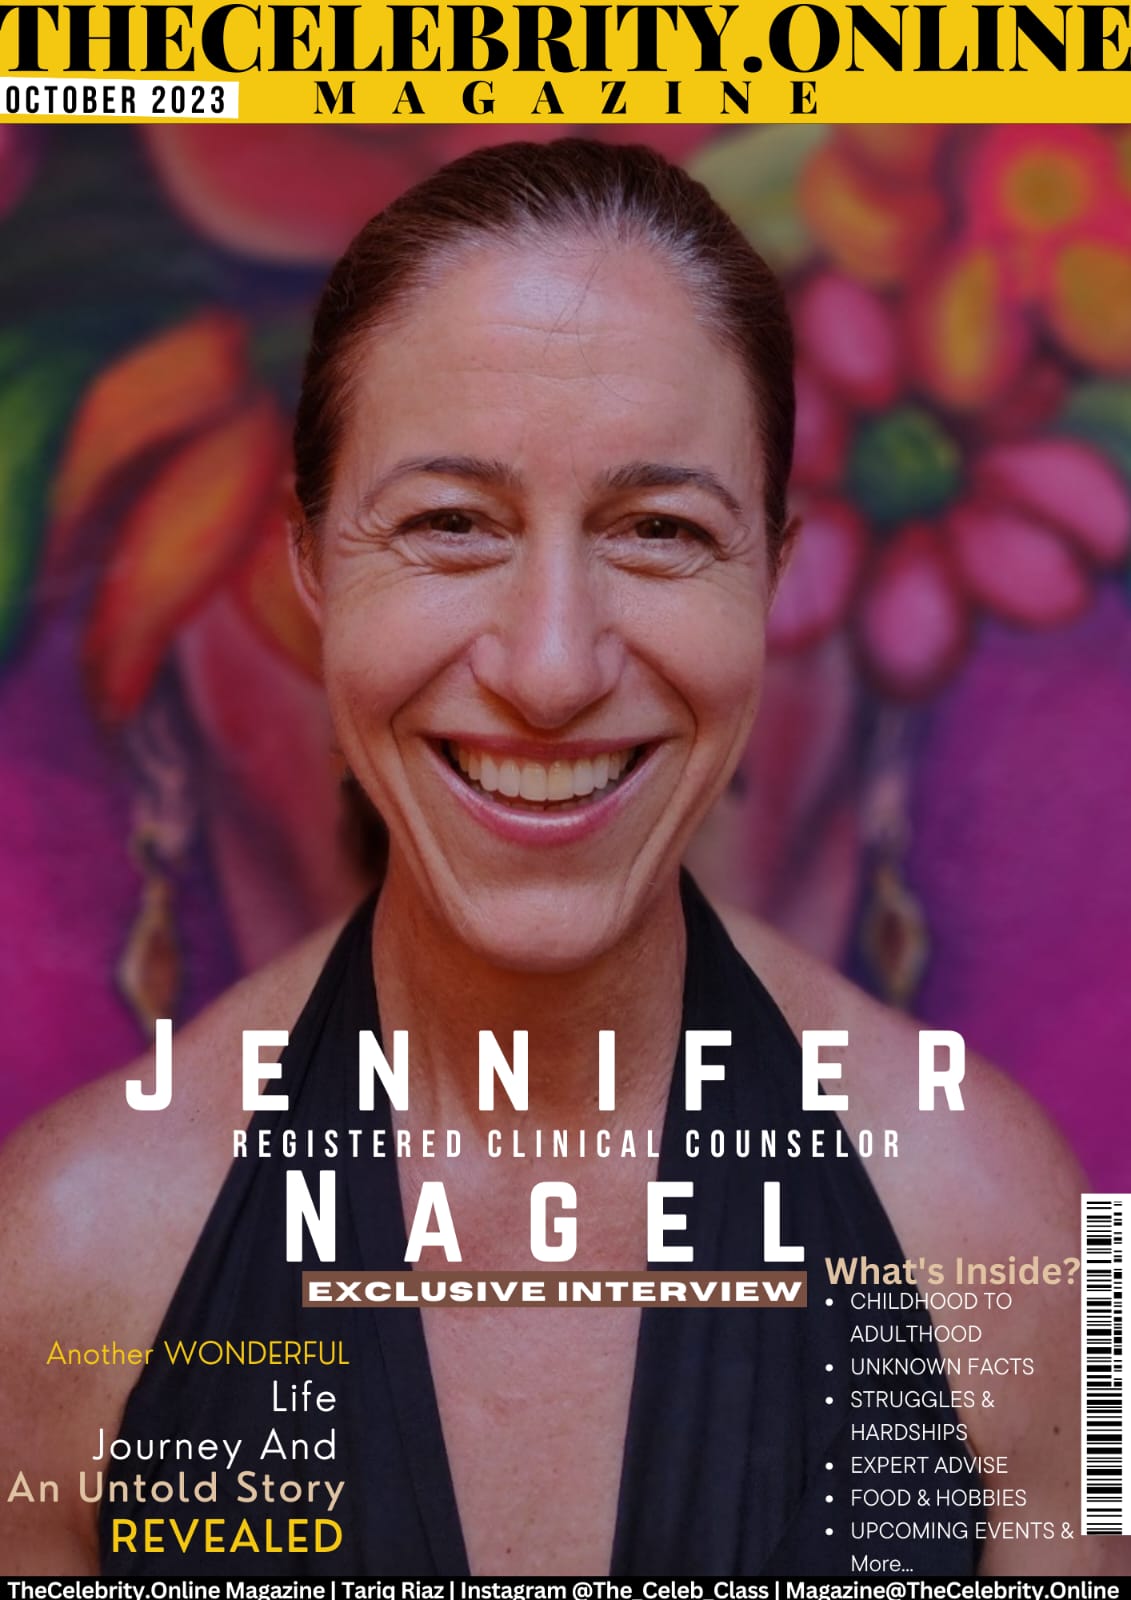 Registered Clinical Counselor Jennifer Nagel – Exclusive Interview